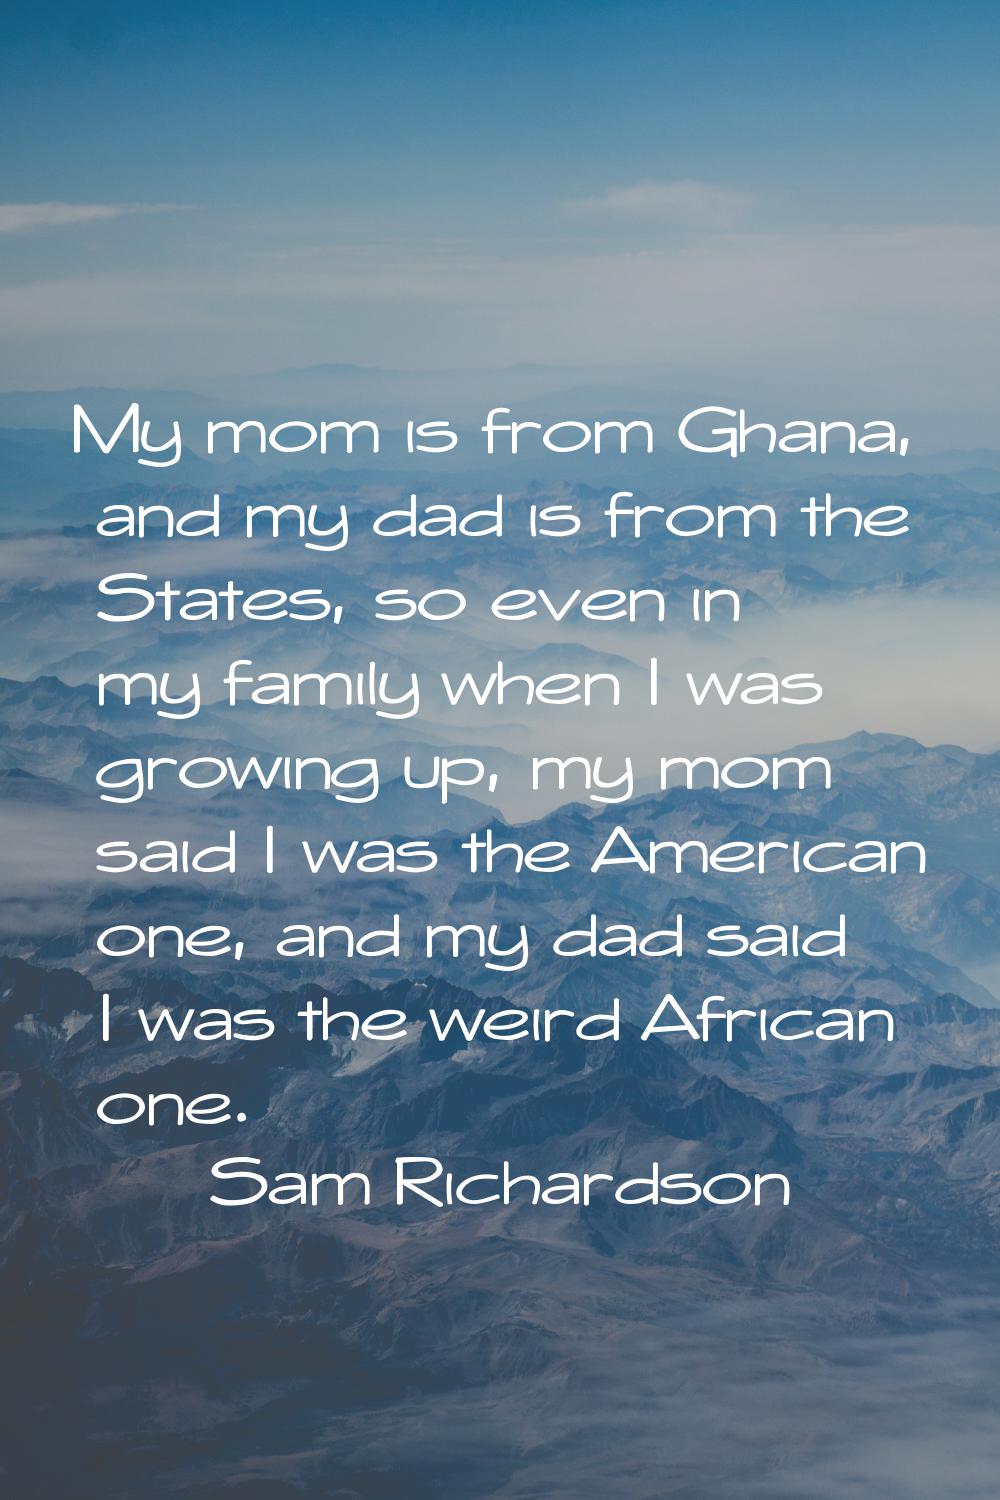 My mom is from Ghana, and my dad is from the States, so even in my family when I was growing up, my